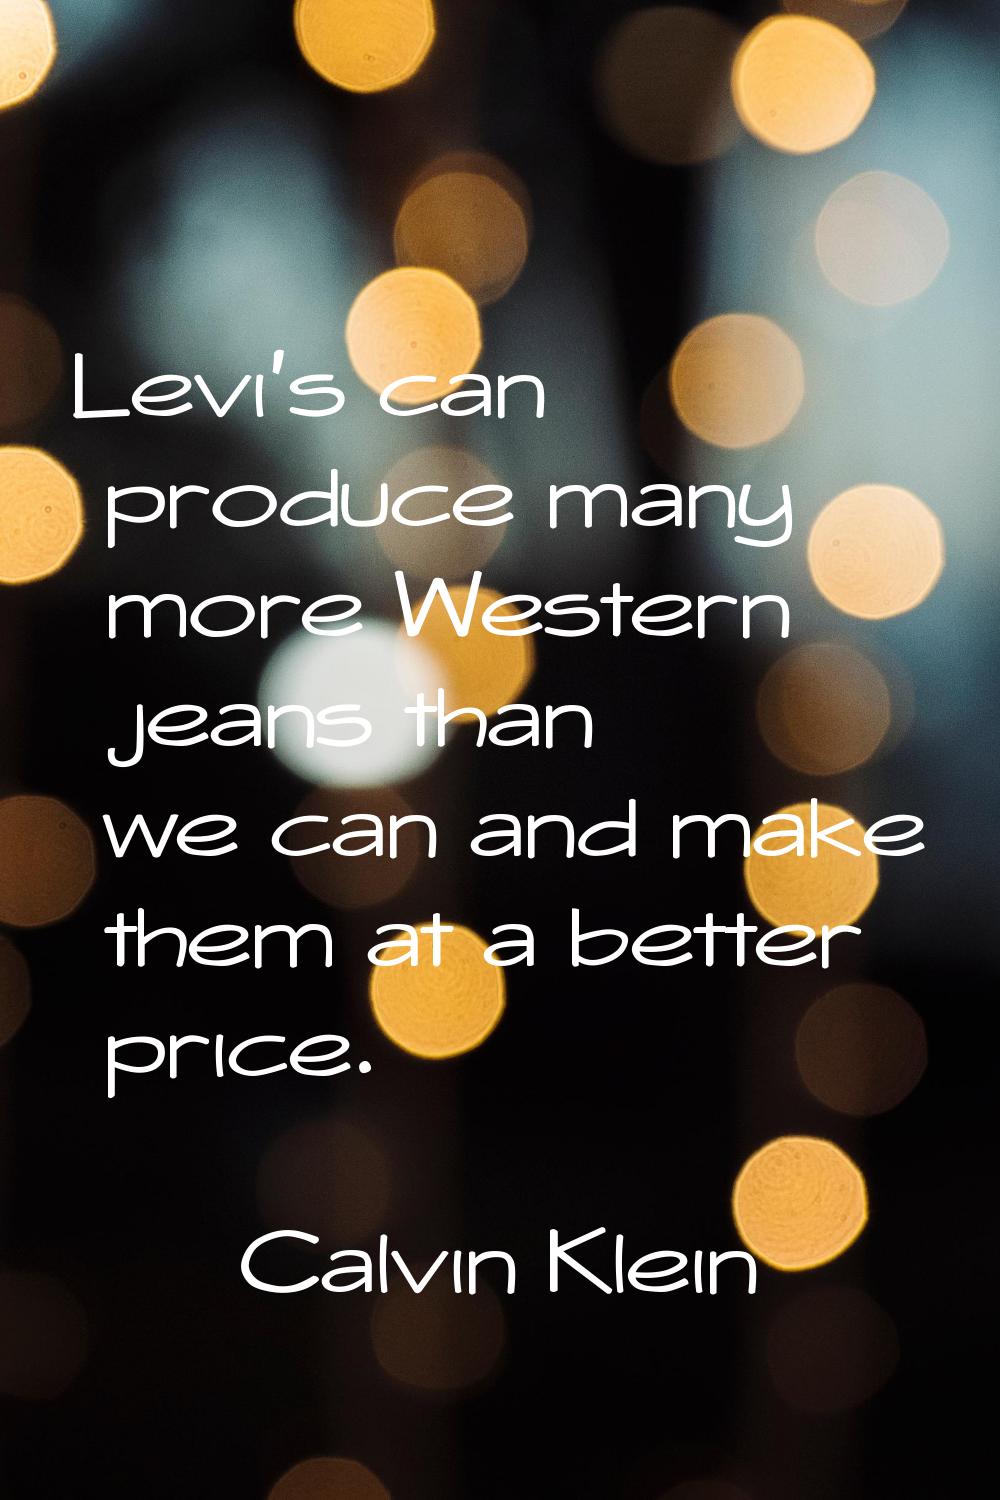 Levi's can produce many more Western jeans than we can and make them at a better price.